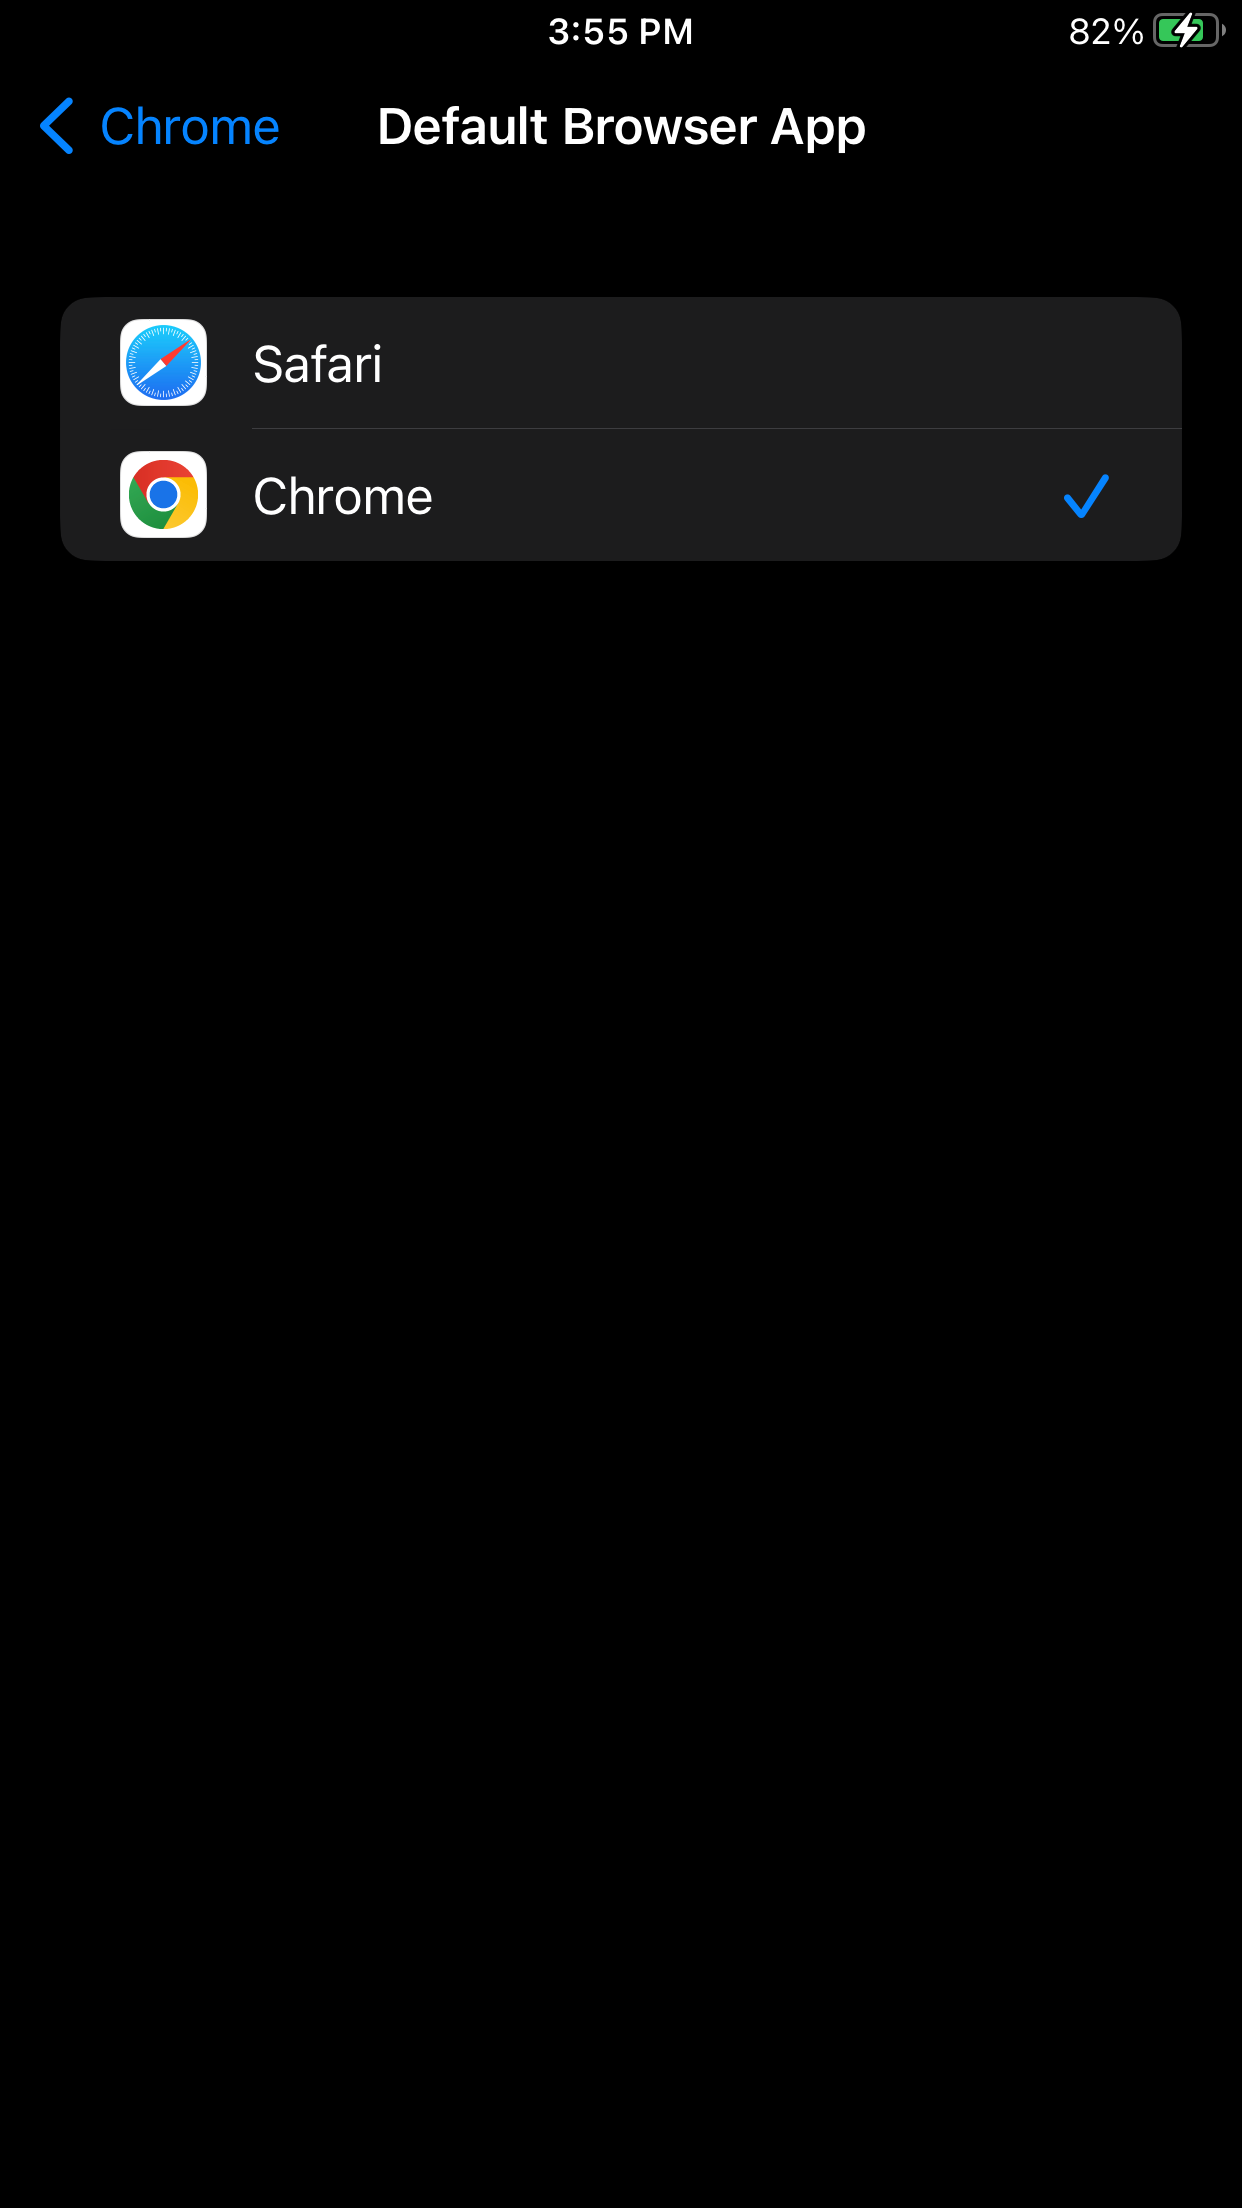 Setting the default browser to Chrome in the Settings app on iPhone.